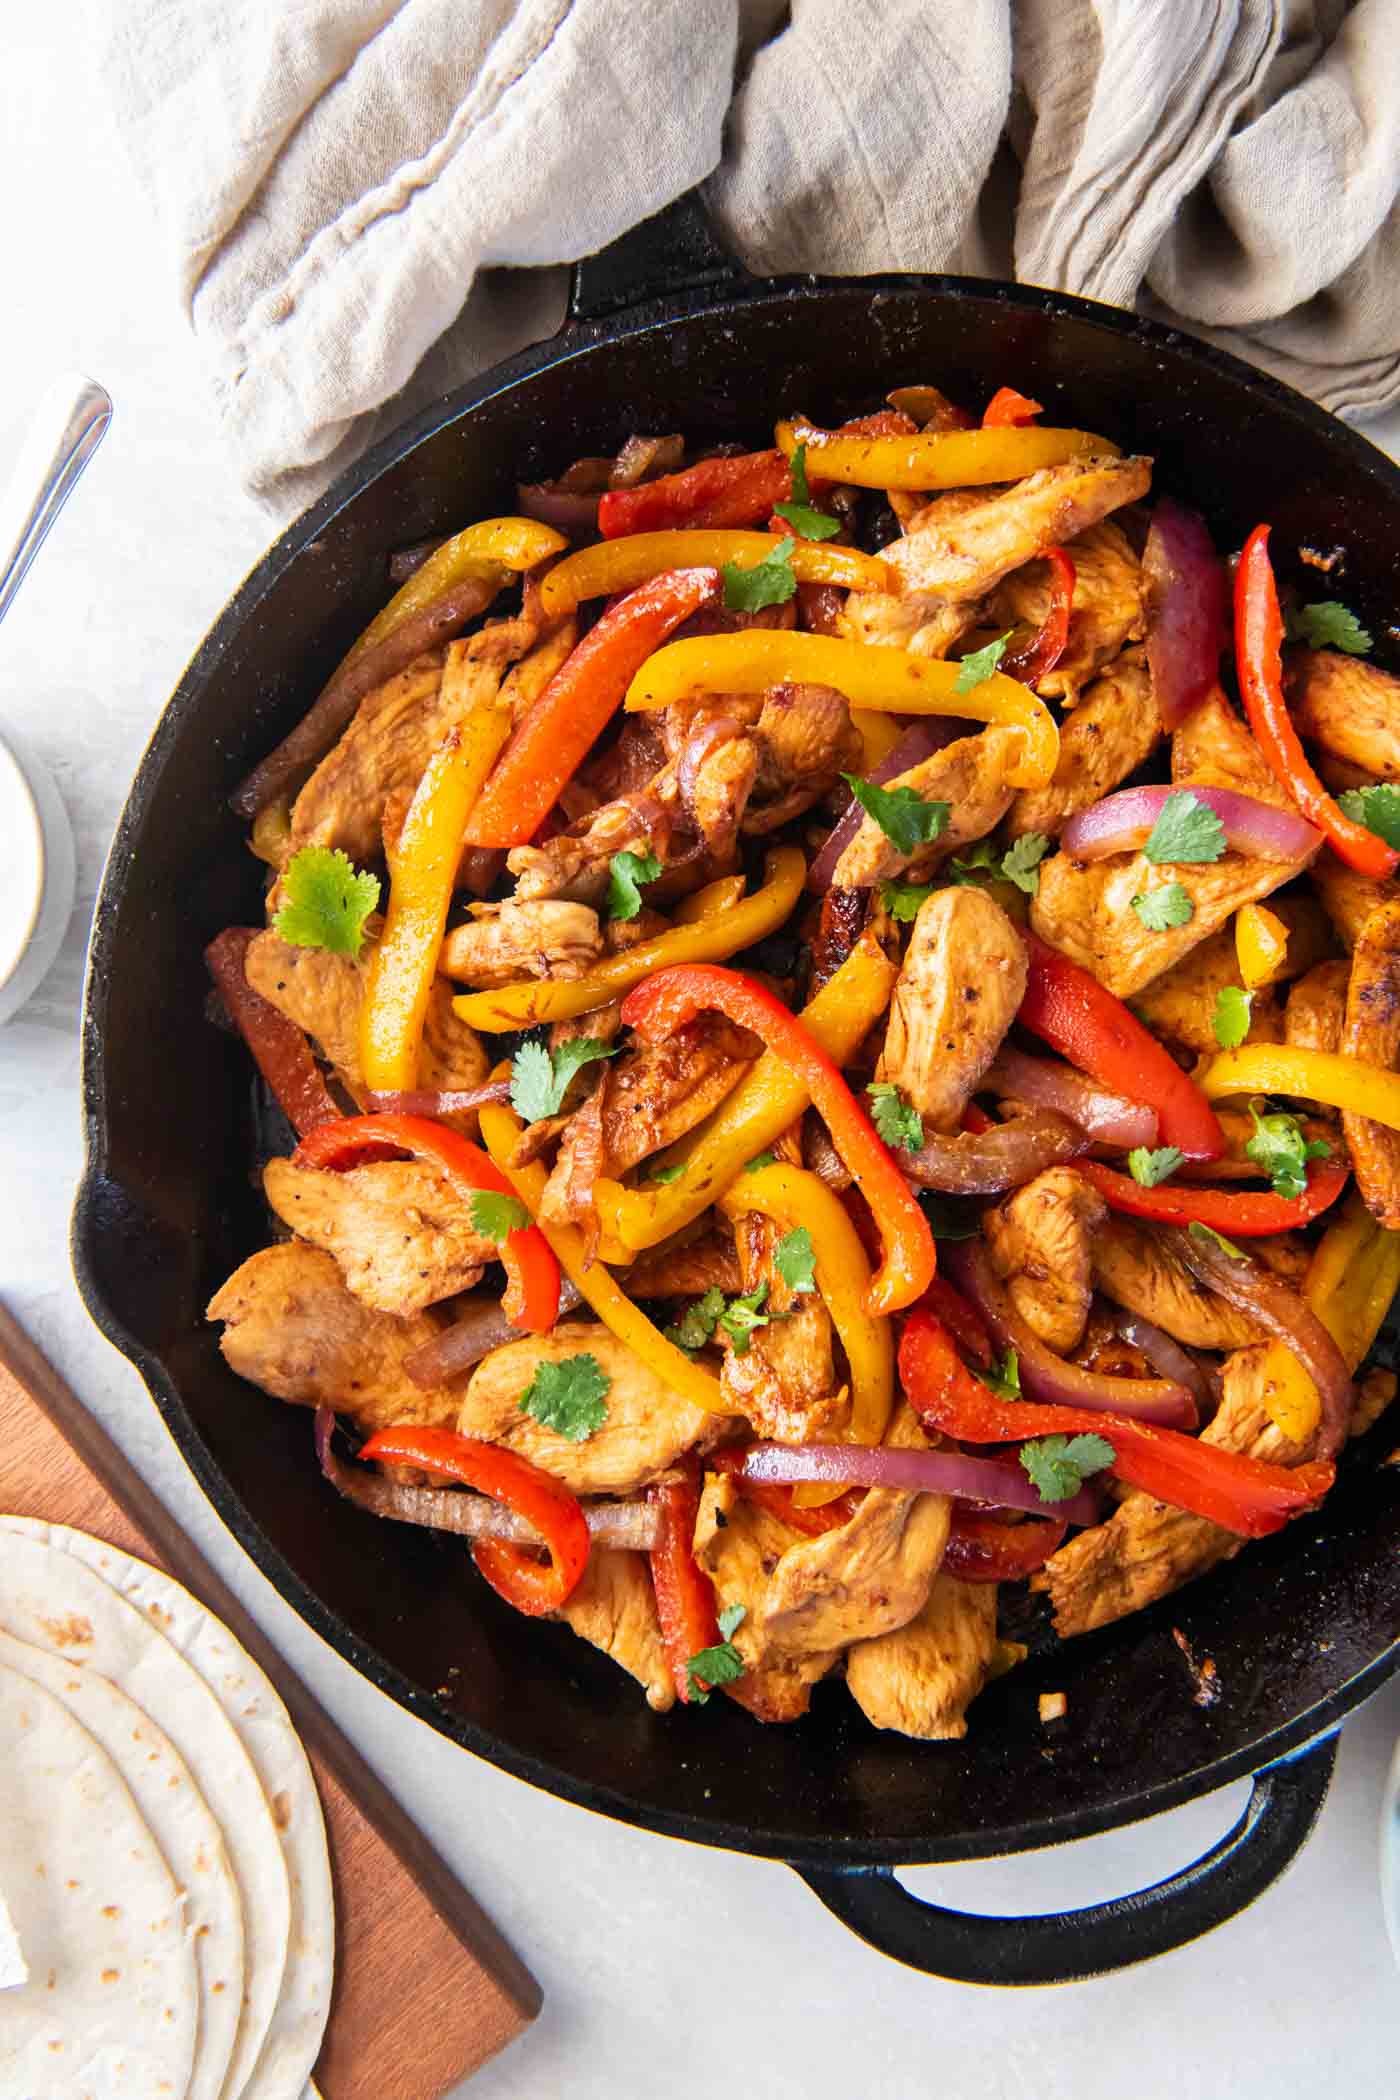 Cooked chicken fajitas in a cast iron skillet.